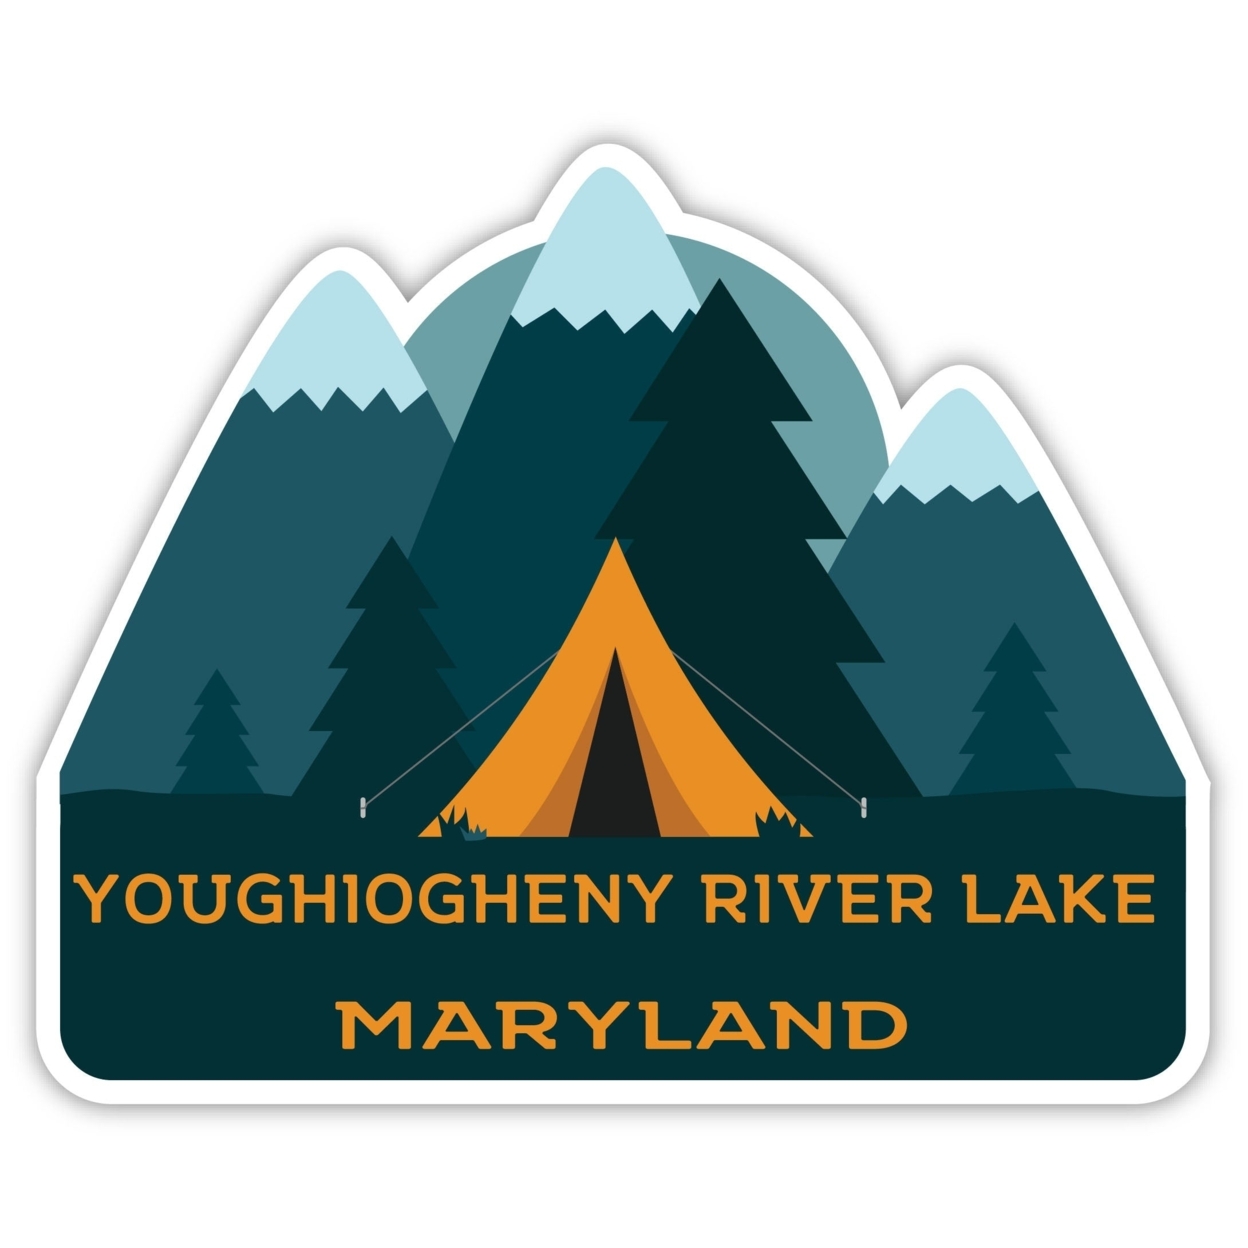 Youghiogheny River Lake Maryland Souvenir Decorative Stickers (Choose Theme And Size) - Single Unit, 4-Inch, Tent